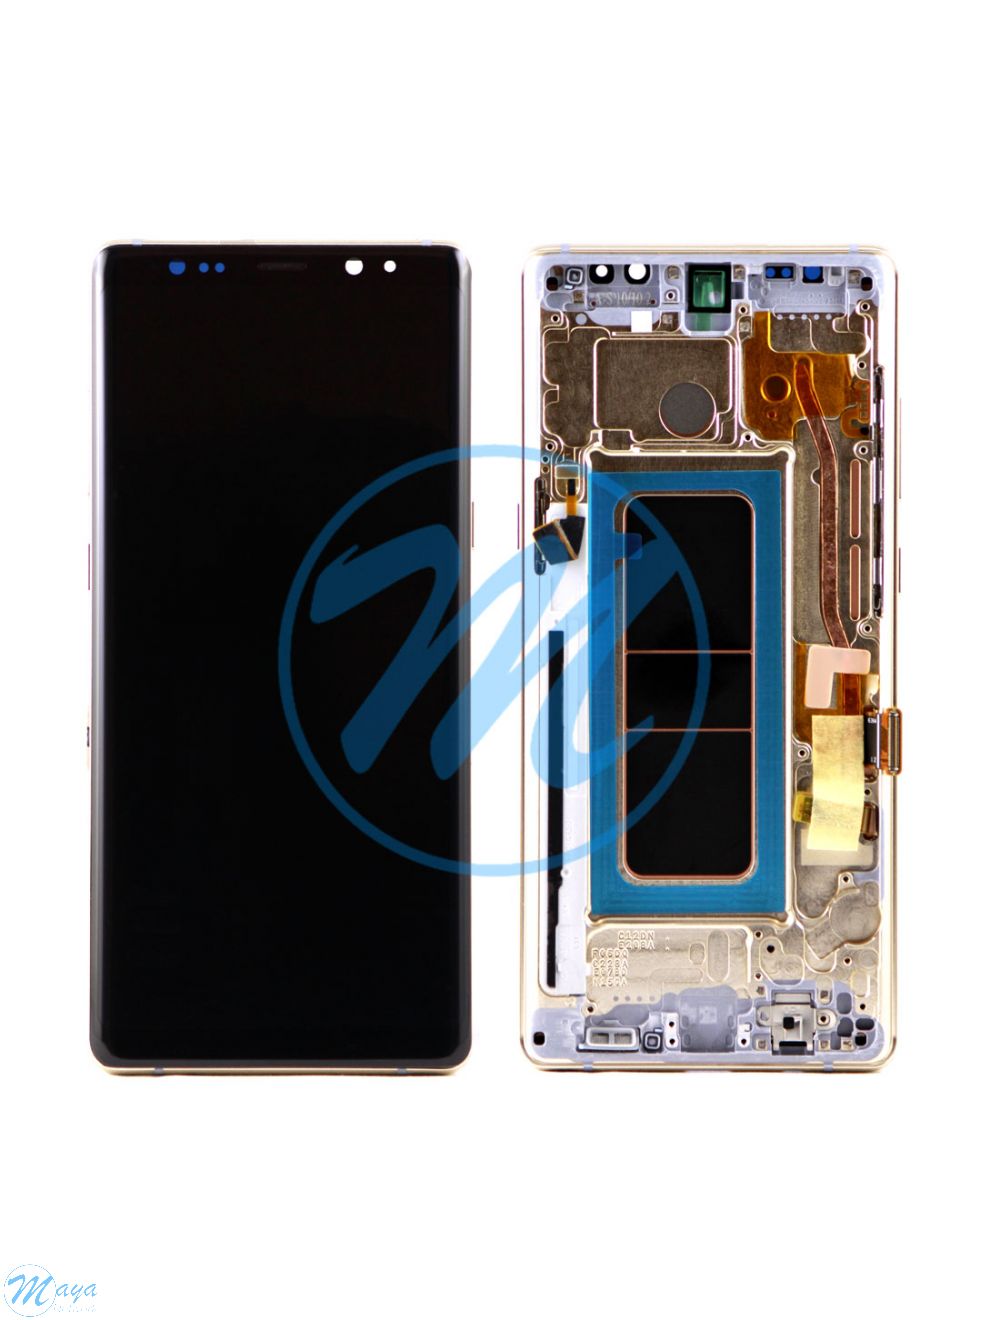 Samsung Note 8 (with Frame) Replacement Part - Gold LOGO)